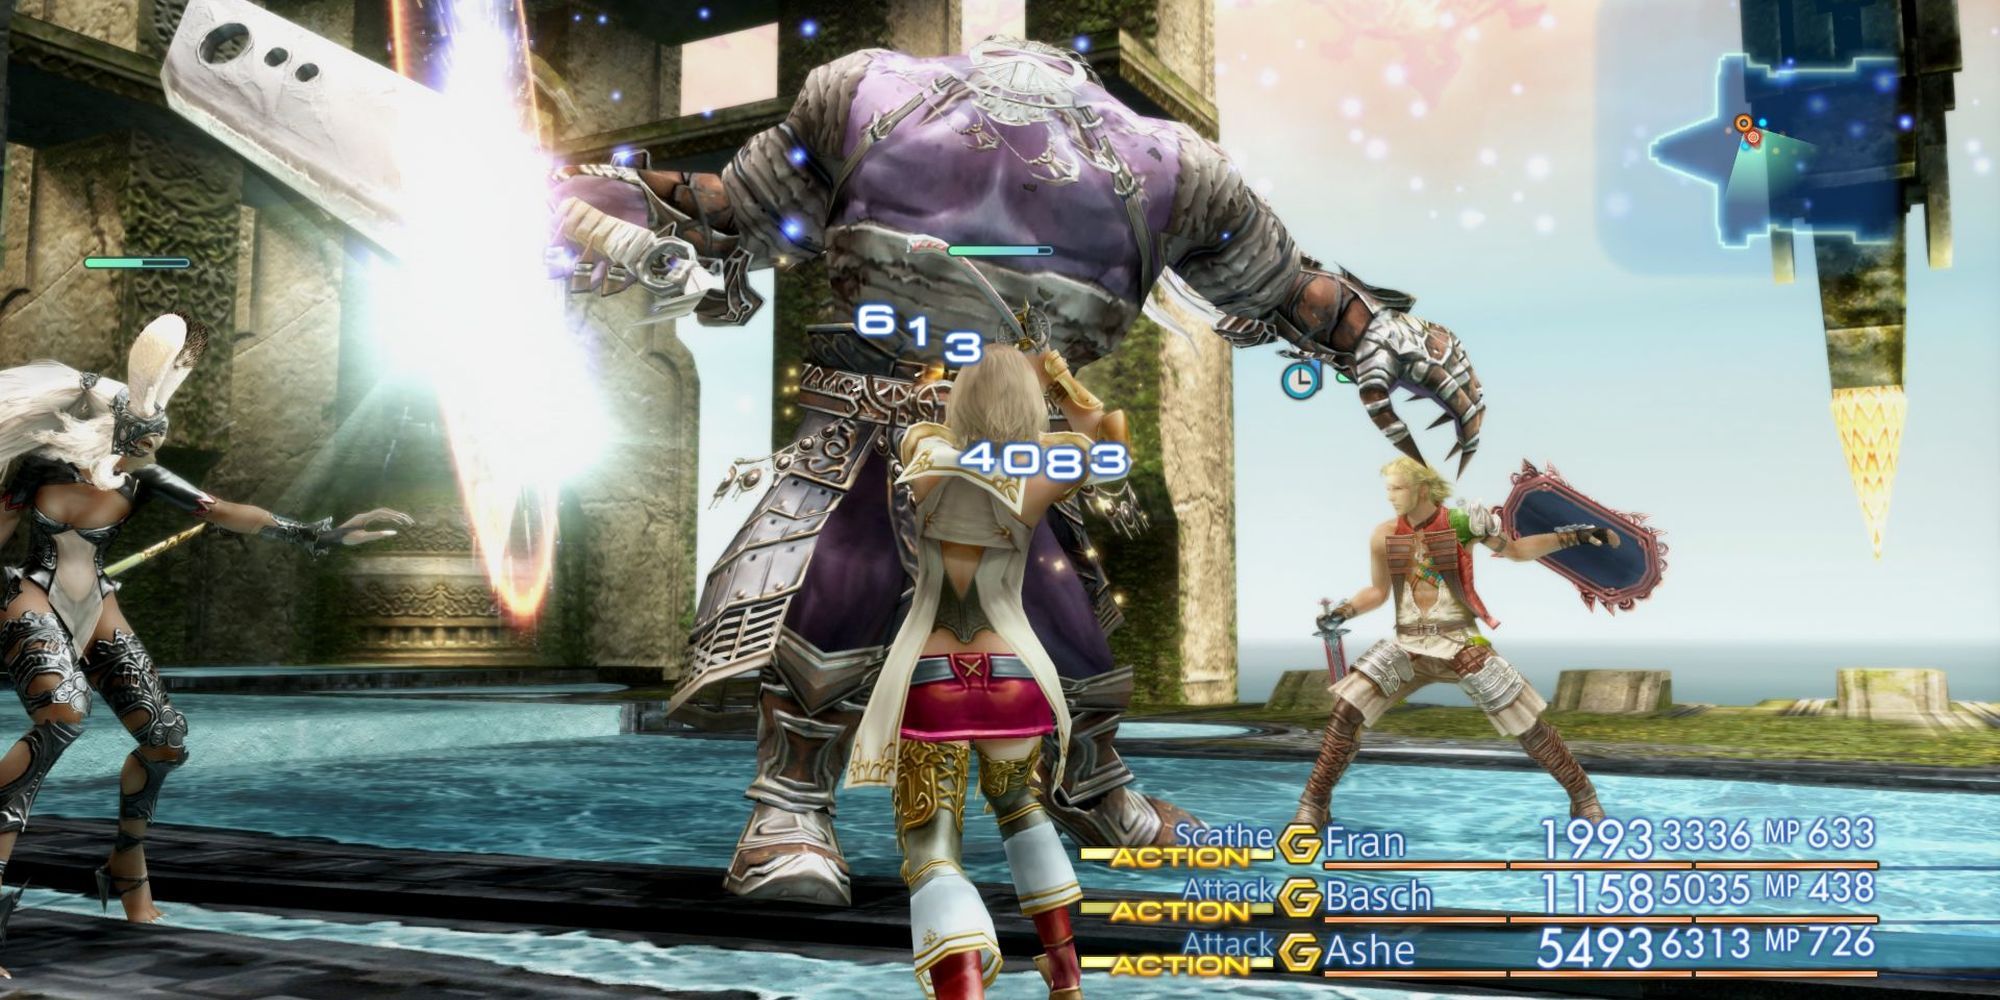 Fran, Basch, and Ashe fight a boss in Final Fantasy XII